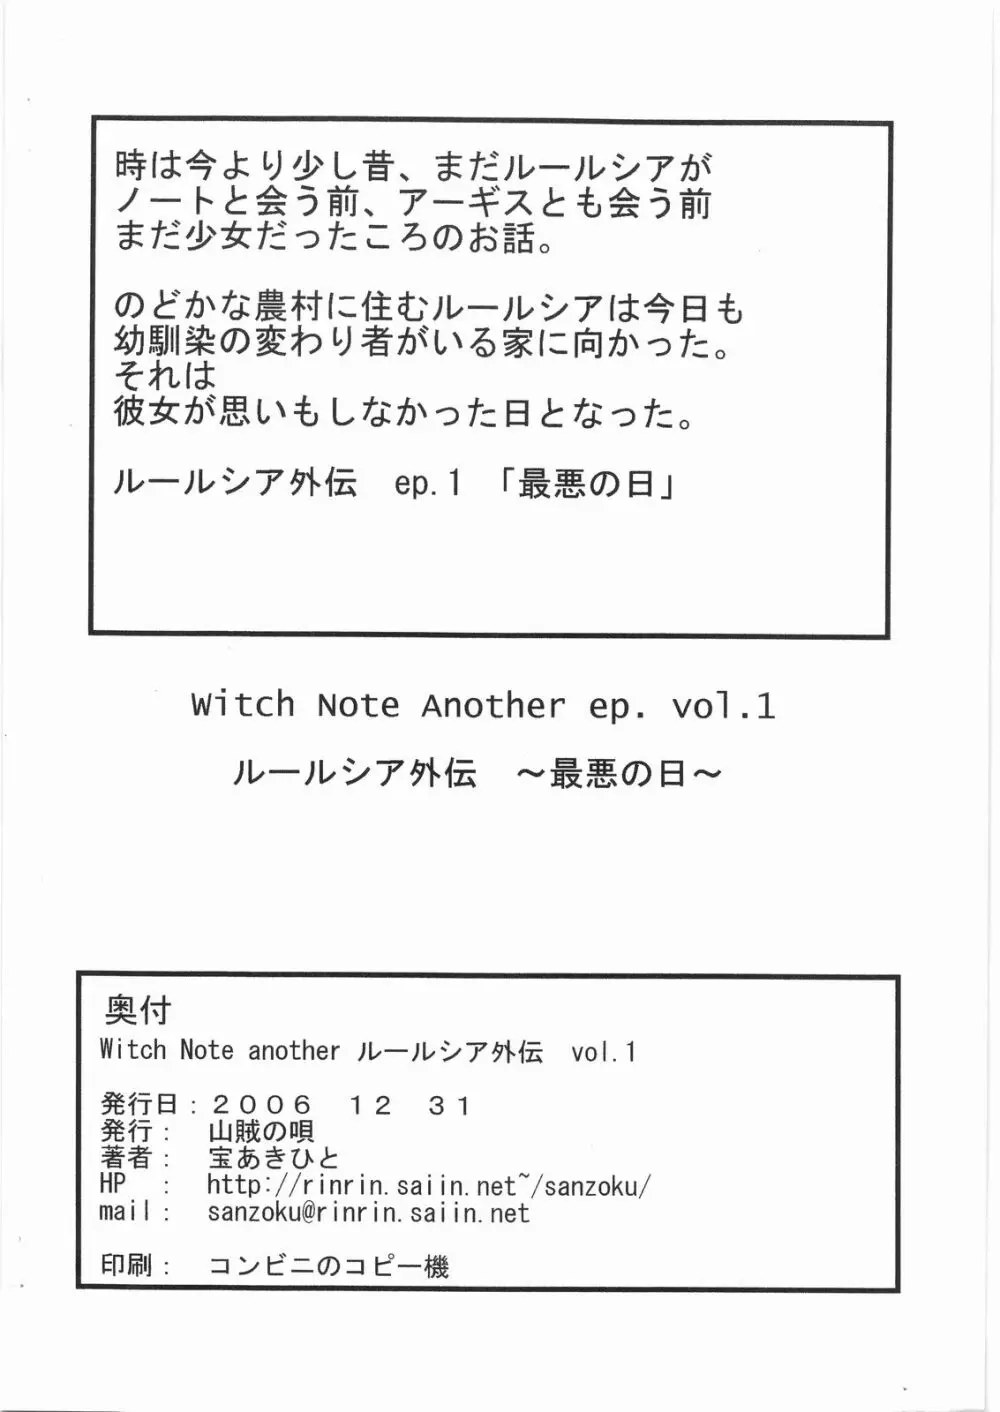 Witch Note another vol.1 ルールシア外伝 ～最悪の日～ 22ページ